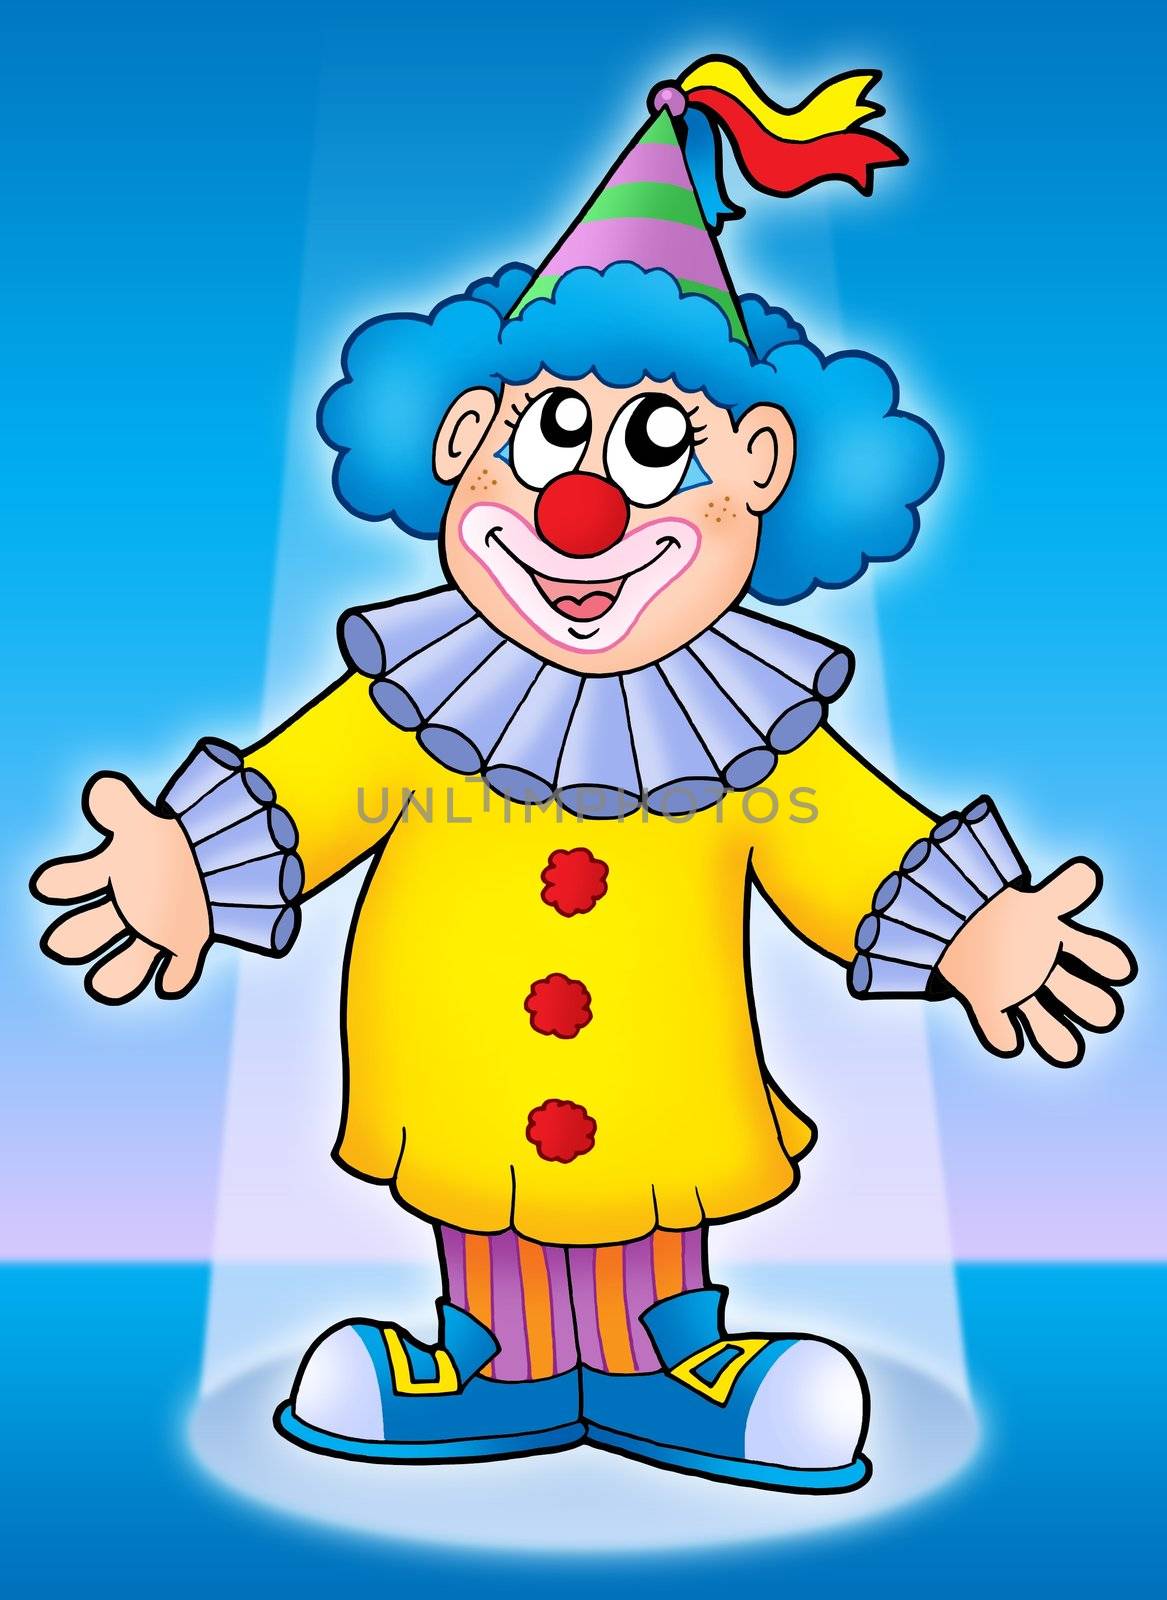 Cute clown on blue background - color illustration.